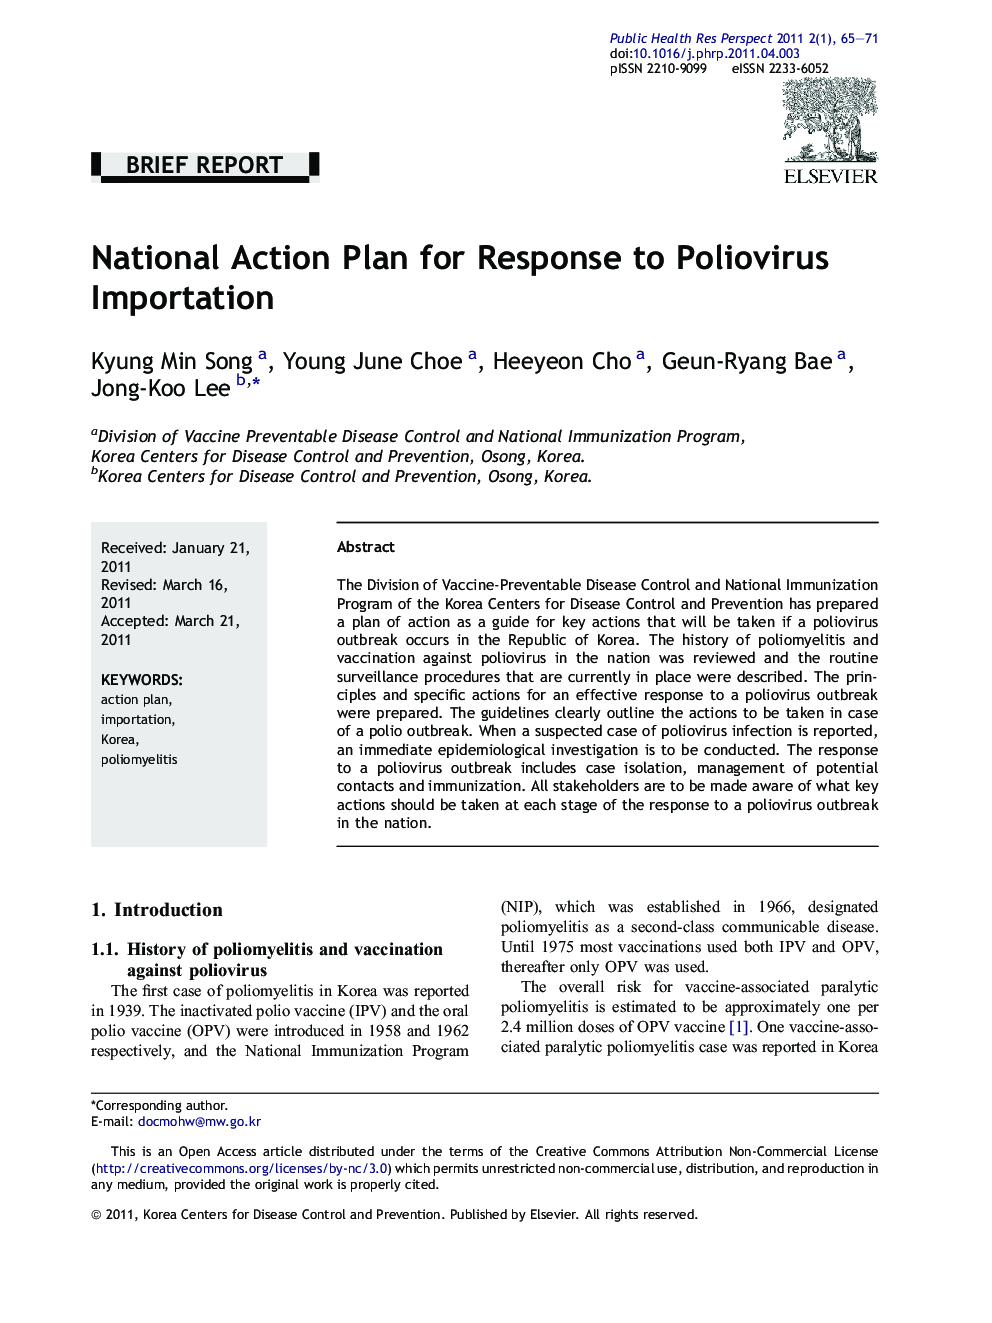 National Action Plan for Response to Poliovirus Importation 